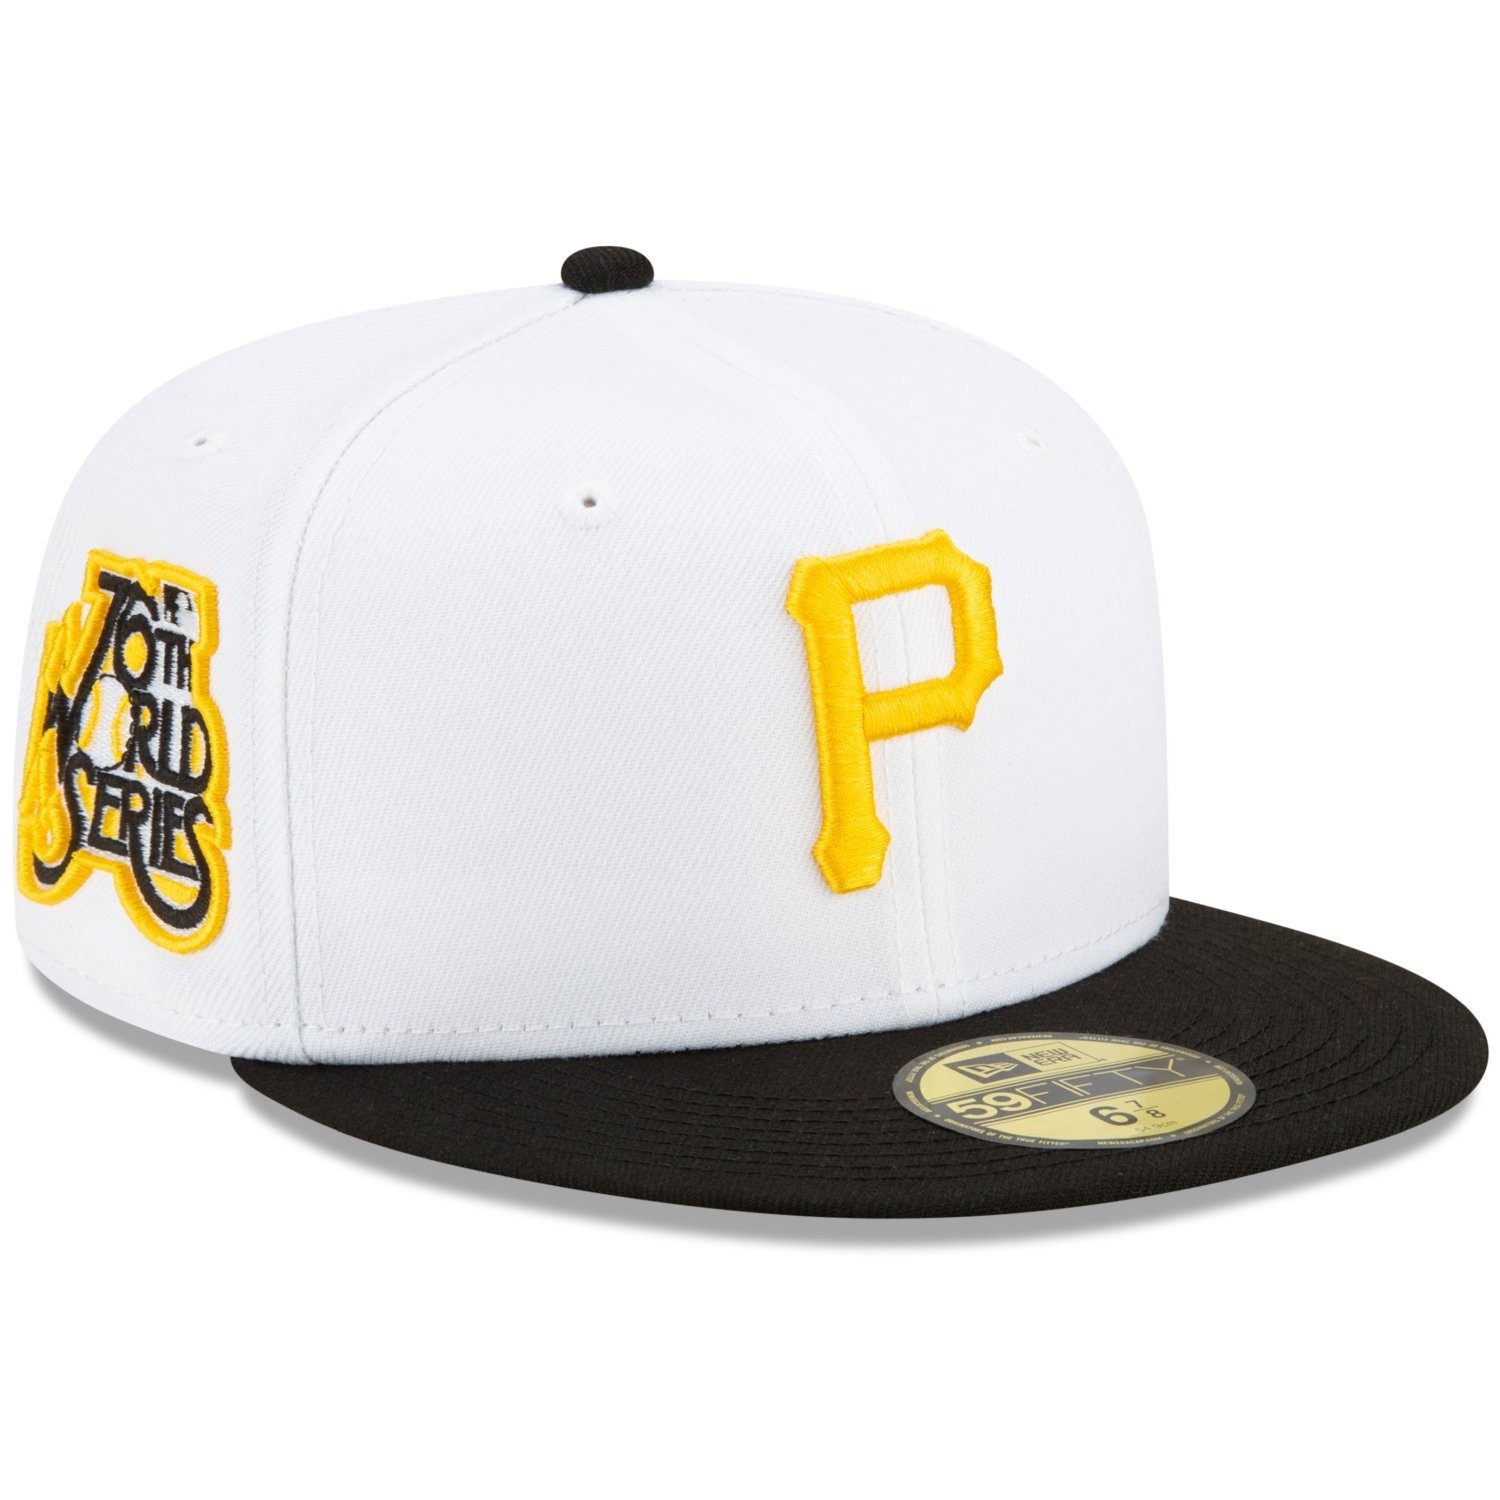 New Era Fitted Cap 59Fifty WORLD SERIES 1979 Pittsburgh Pirates